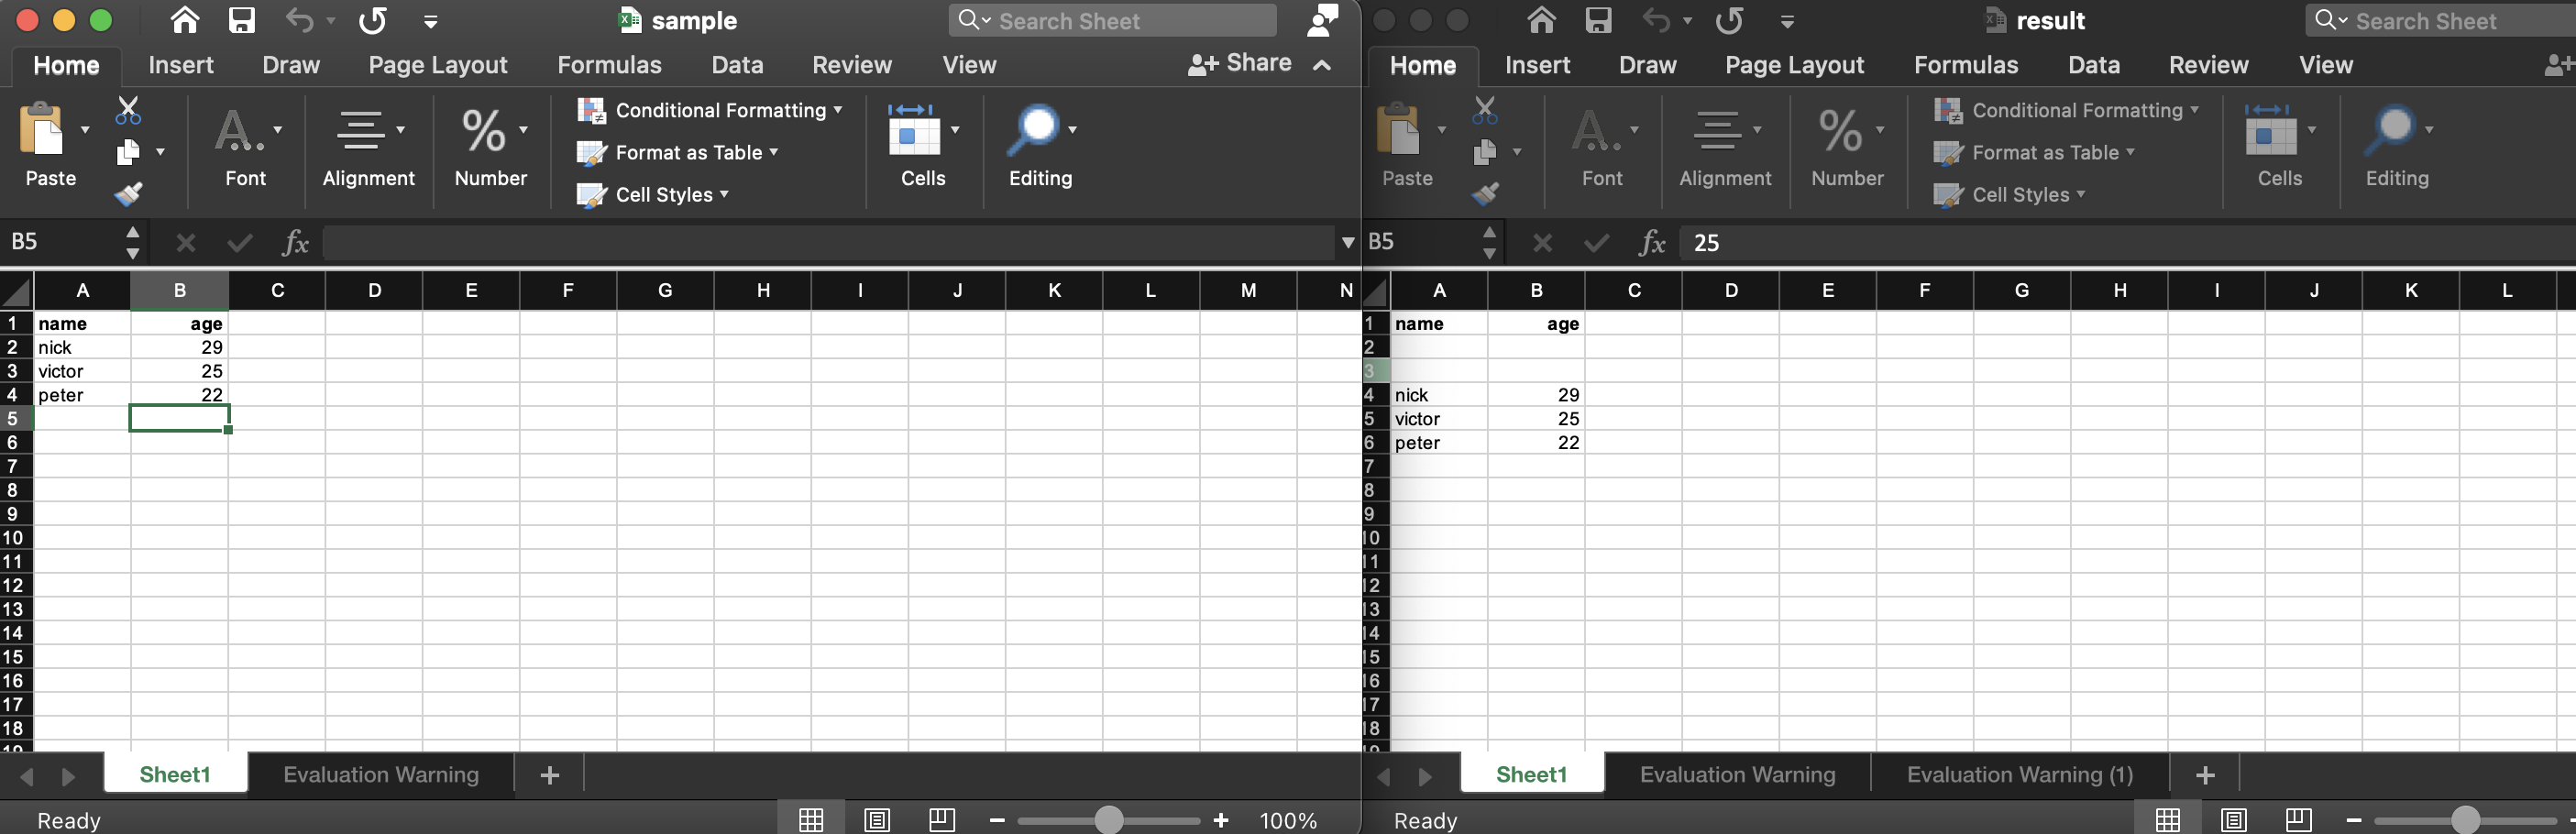 insert rows and columns in an Excel file using Node.js